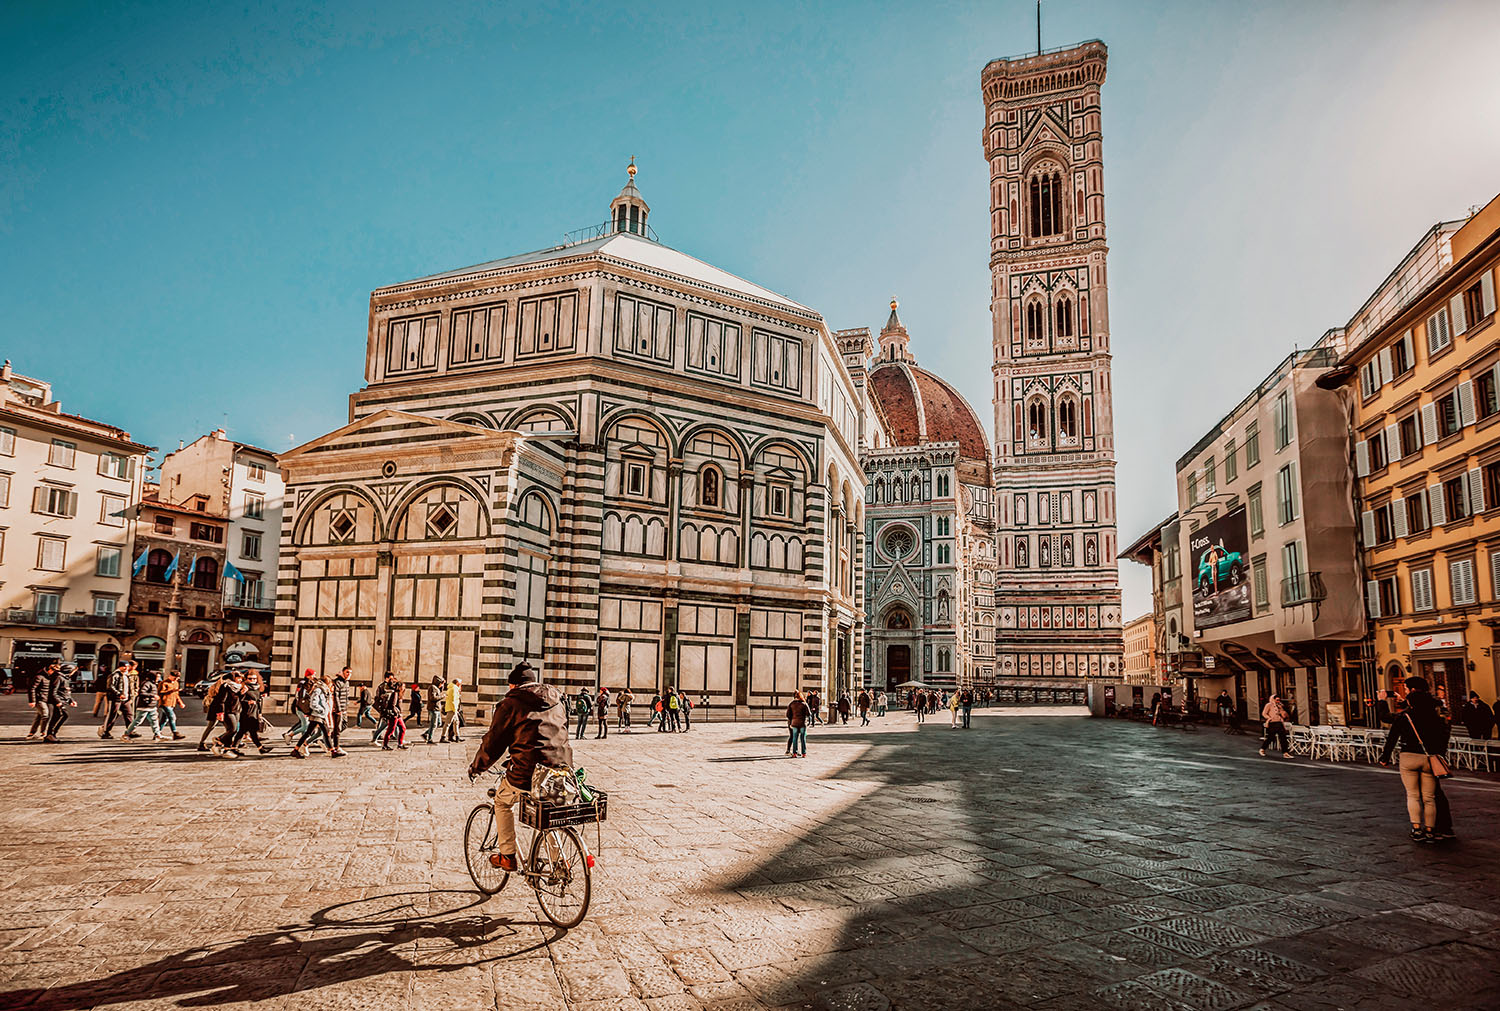 Firenze (Florence), Italy 